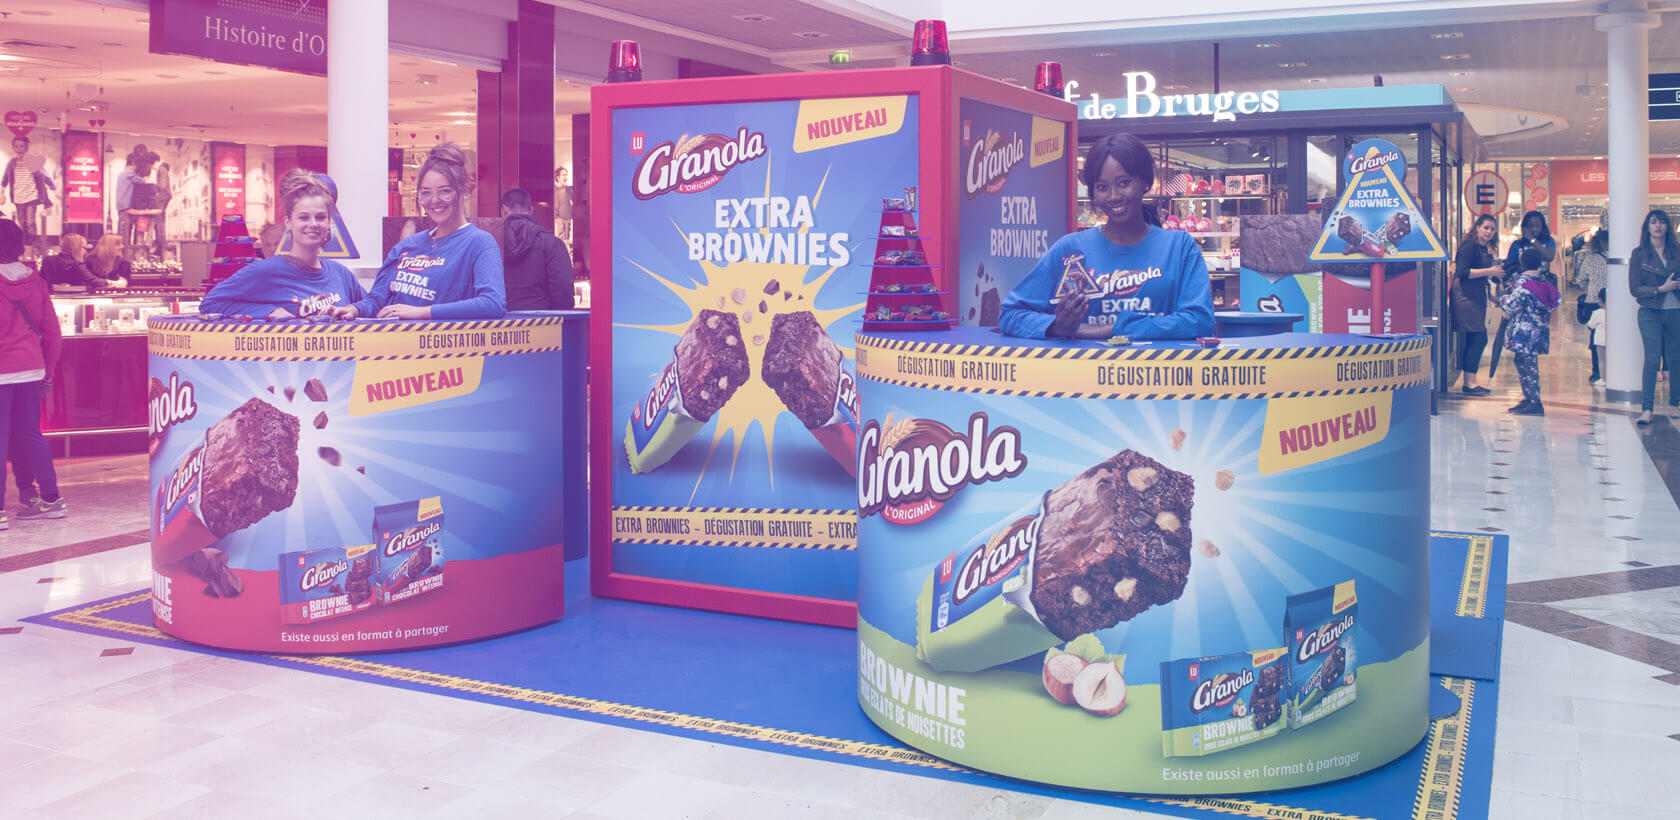 Animation commerciale Granola Extra Brownie - Mall Tour Globe